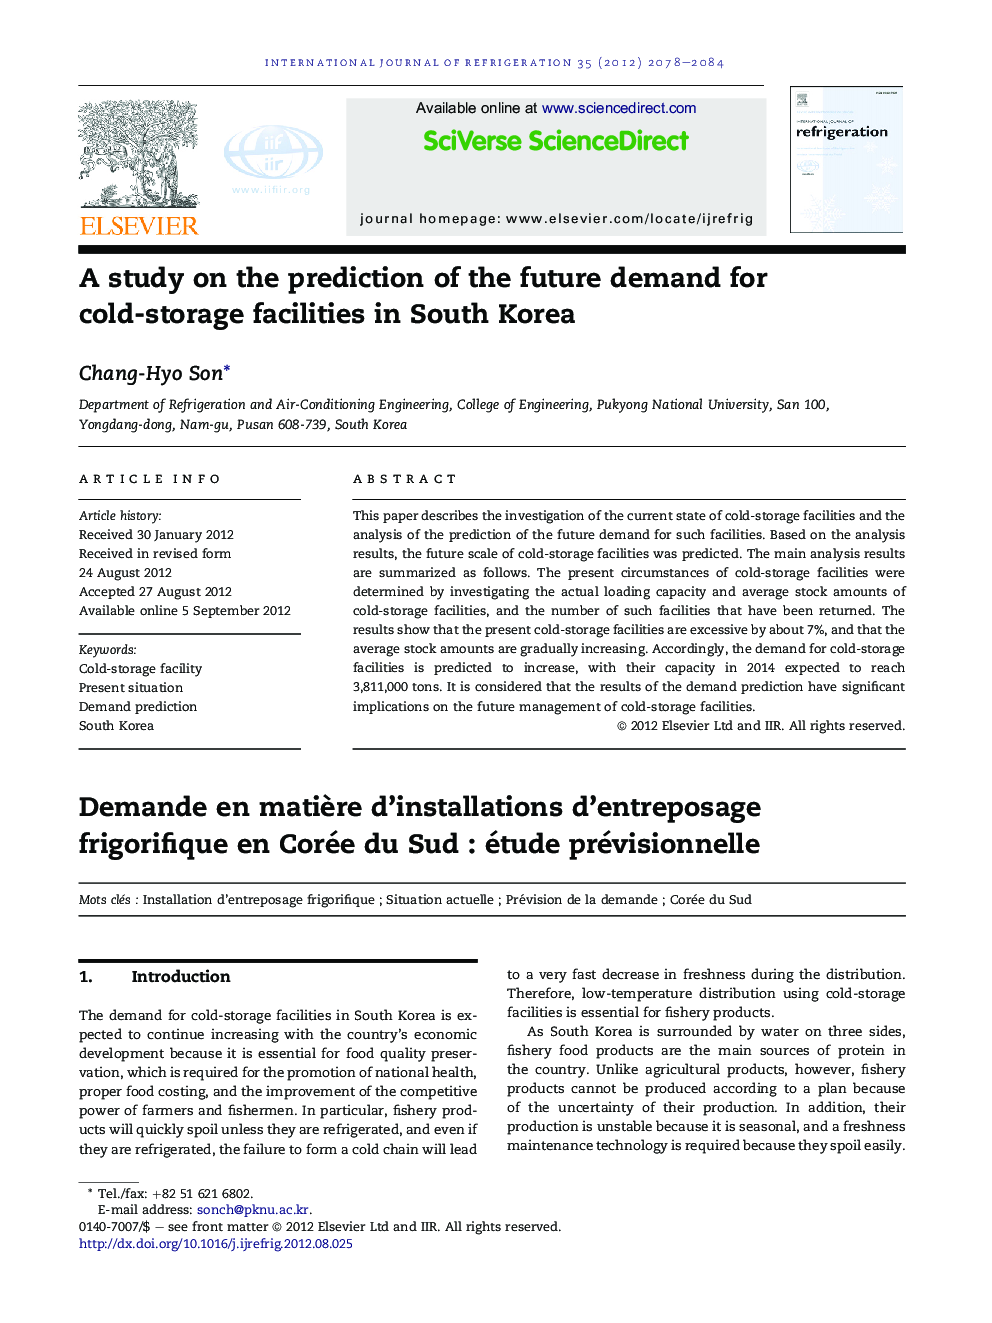 A study on the prediction of the future demand for cold-storage facilities in South Korea